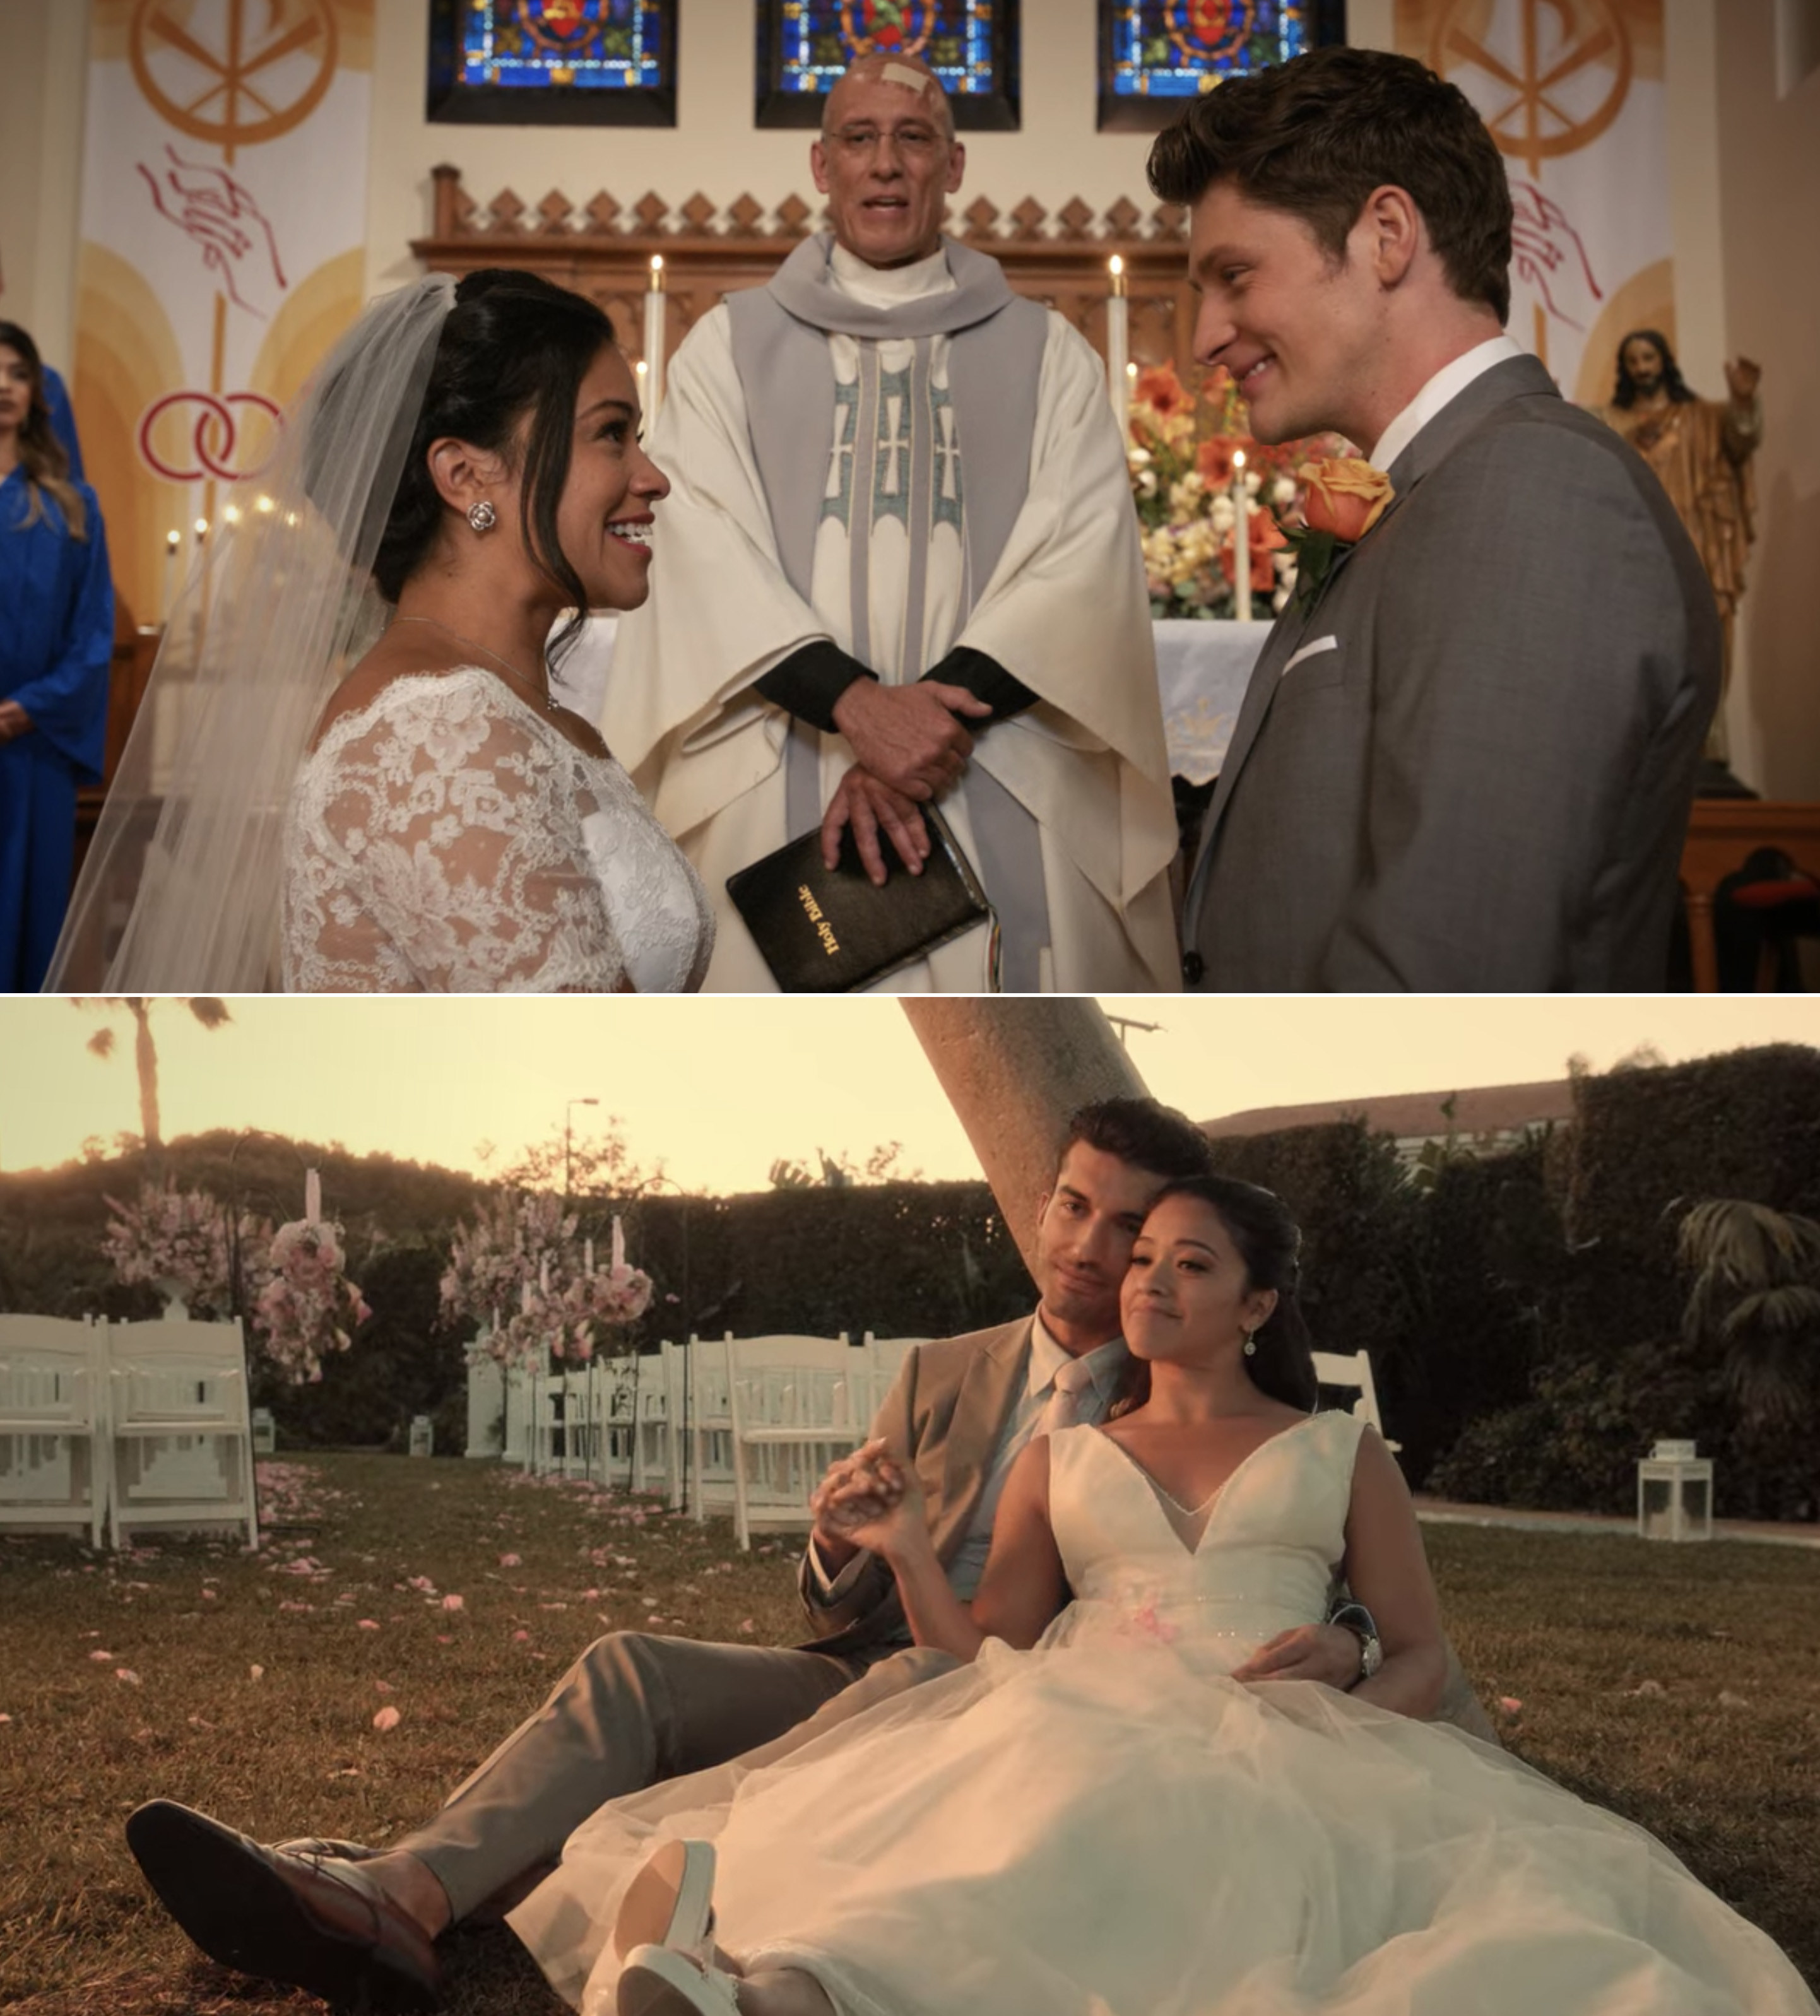 Jane and Michael on their wedding day and Jane and Rafael on theirs